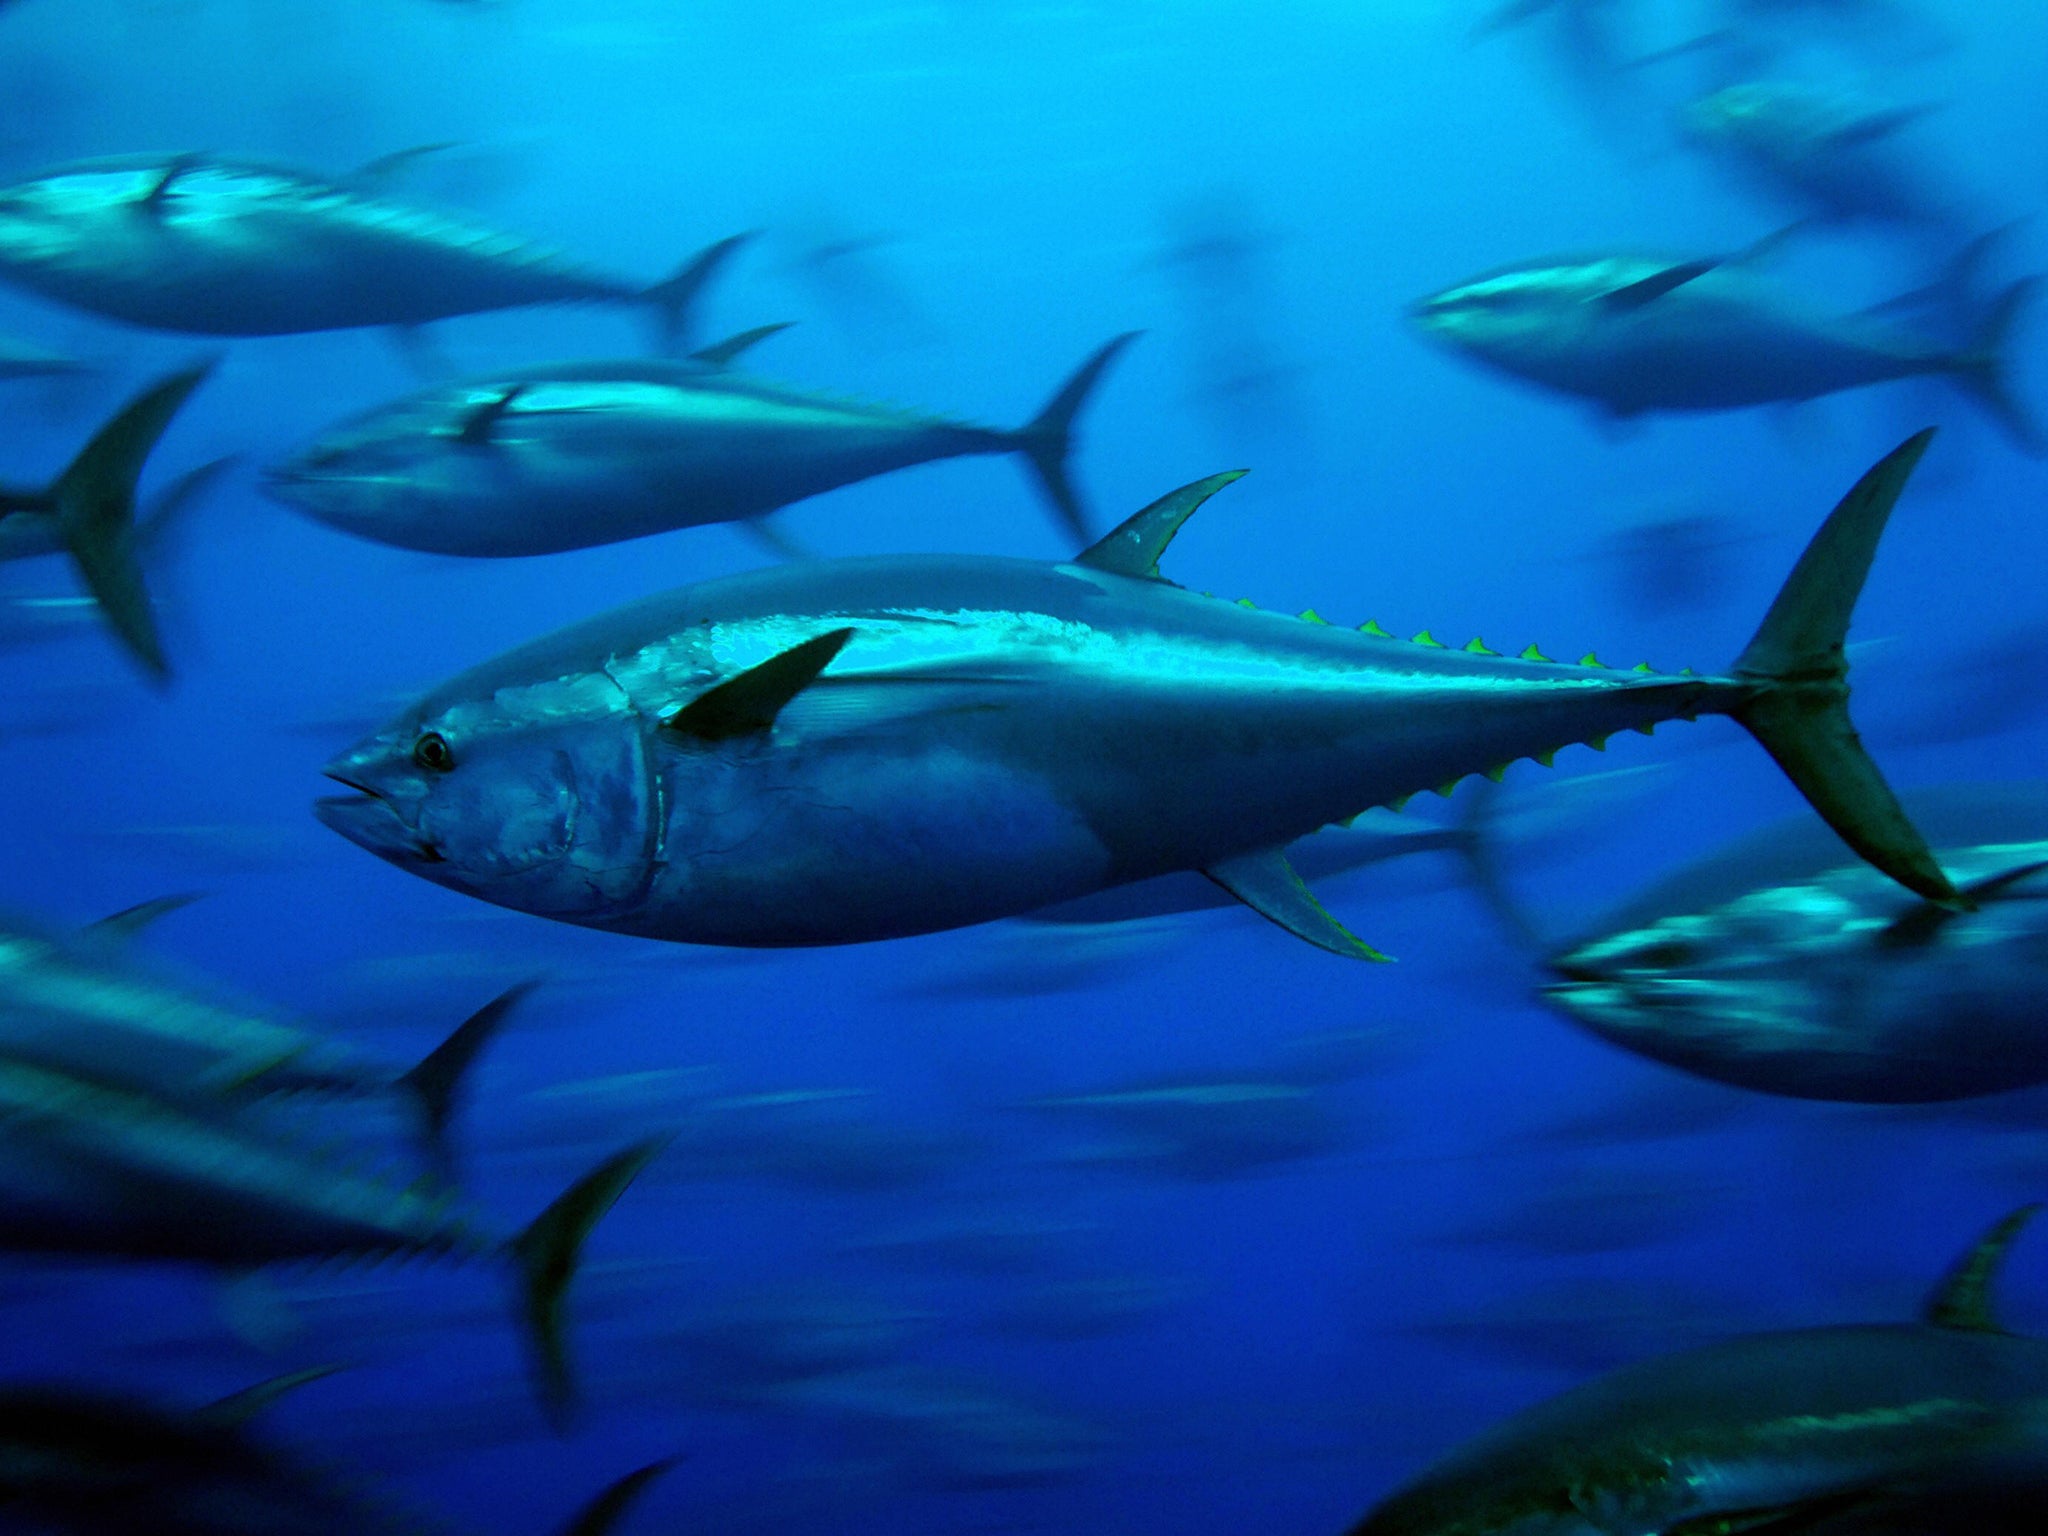 Can celebrities help to invigorate democracy in the same way as they have to save tuna?